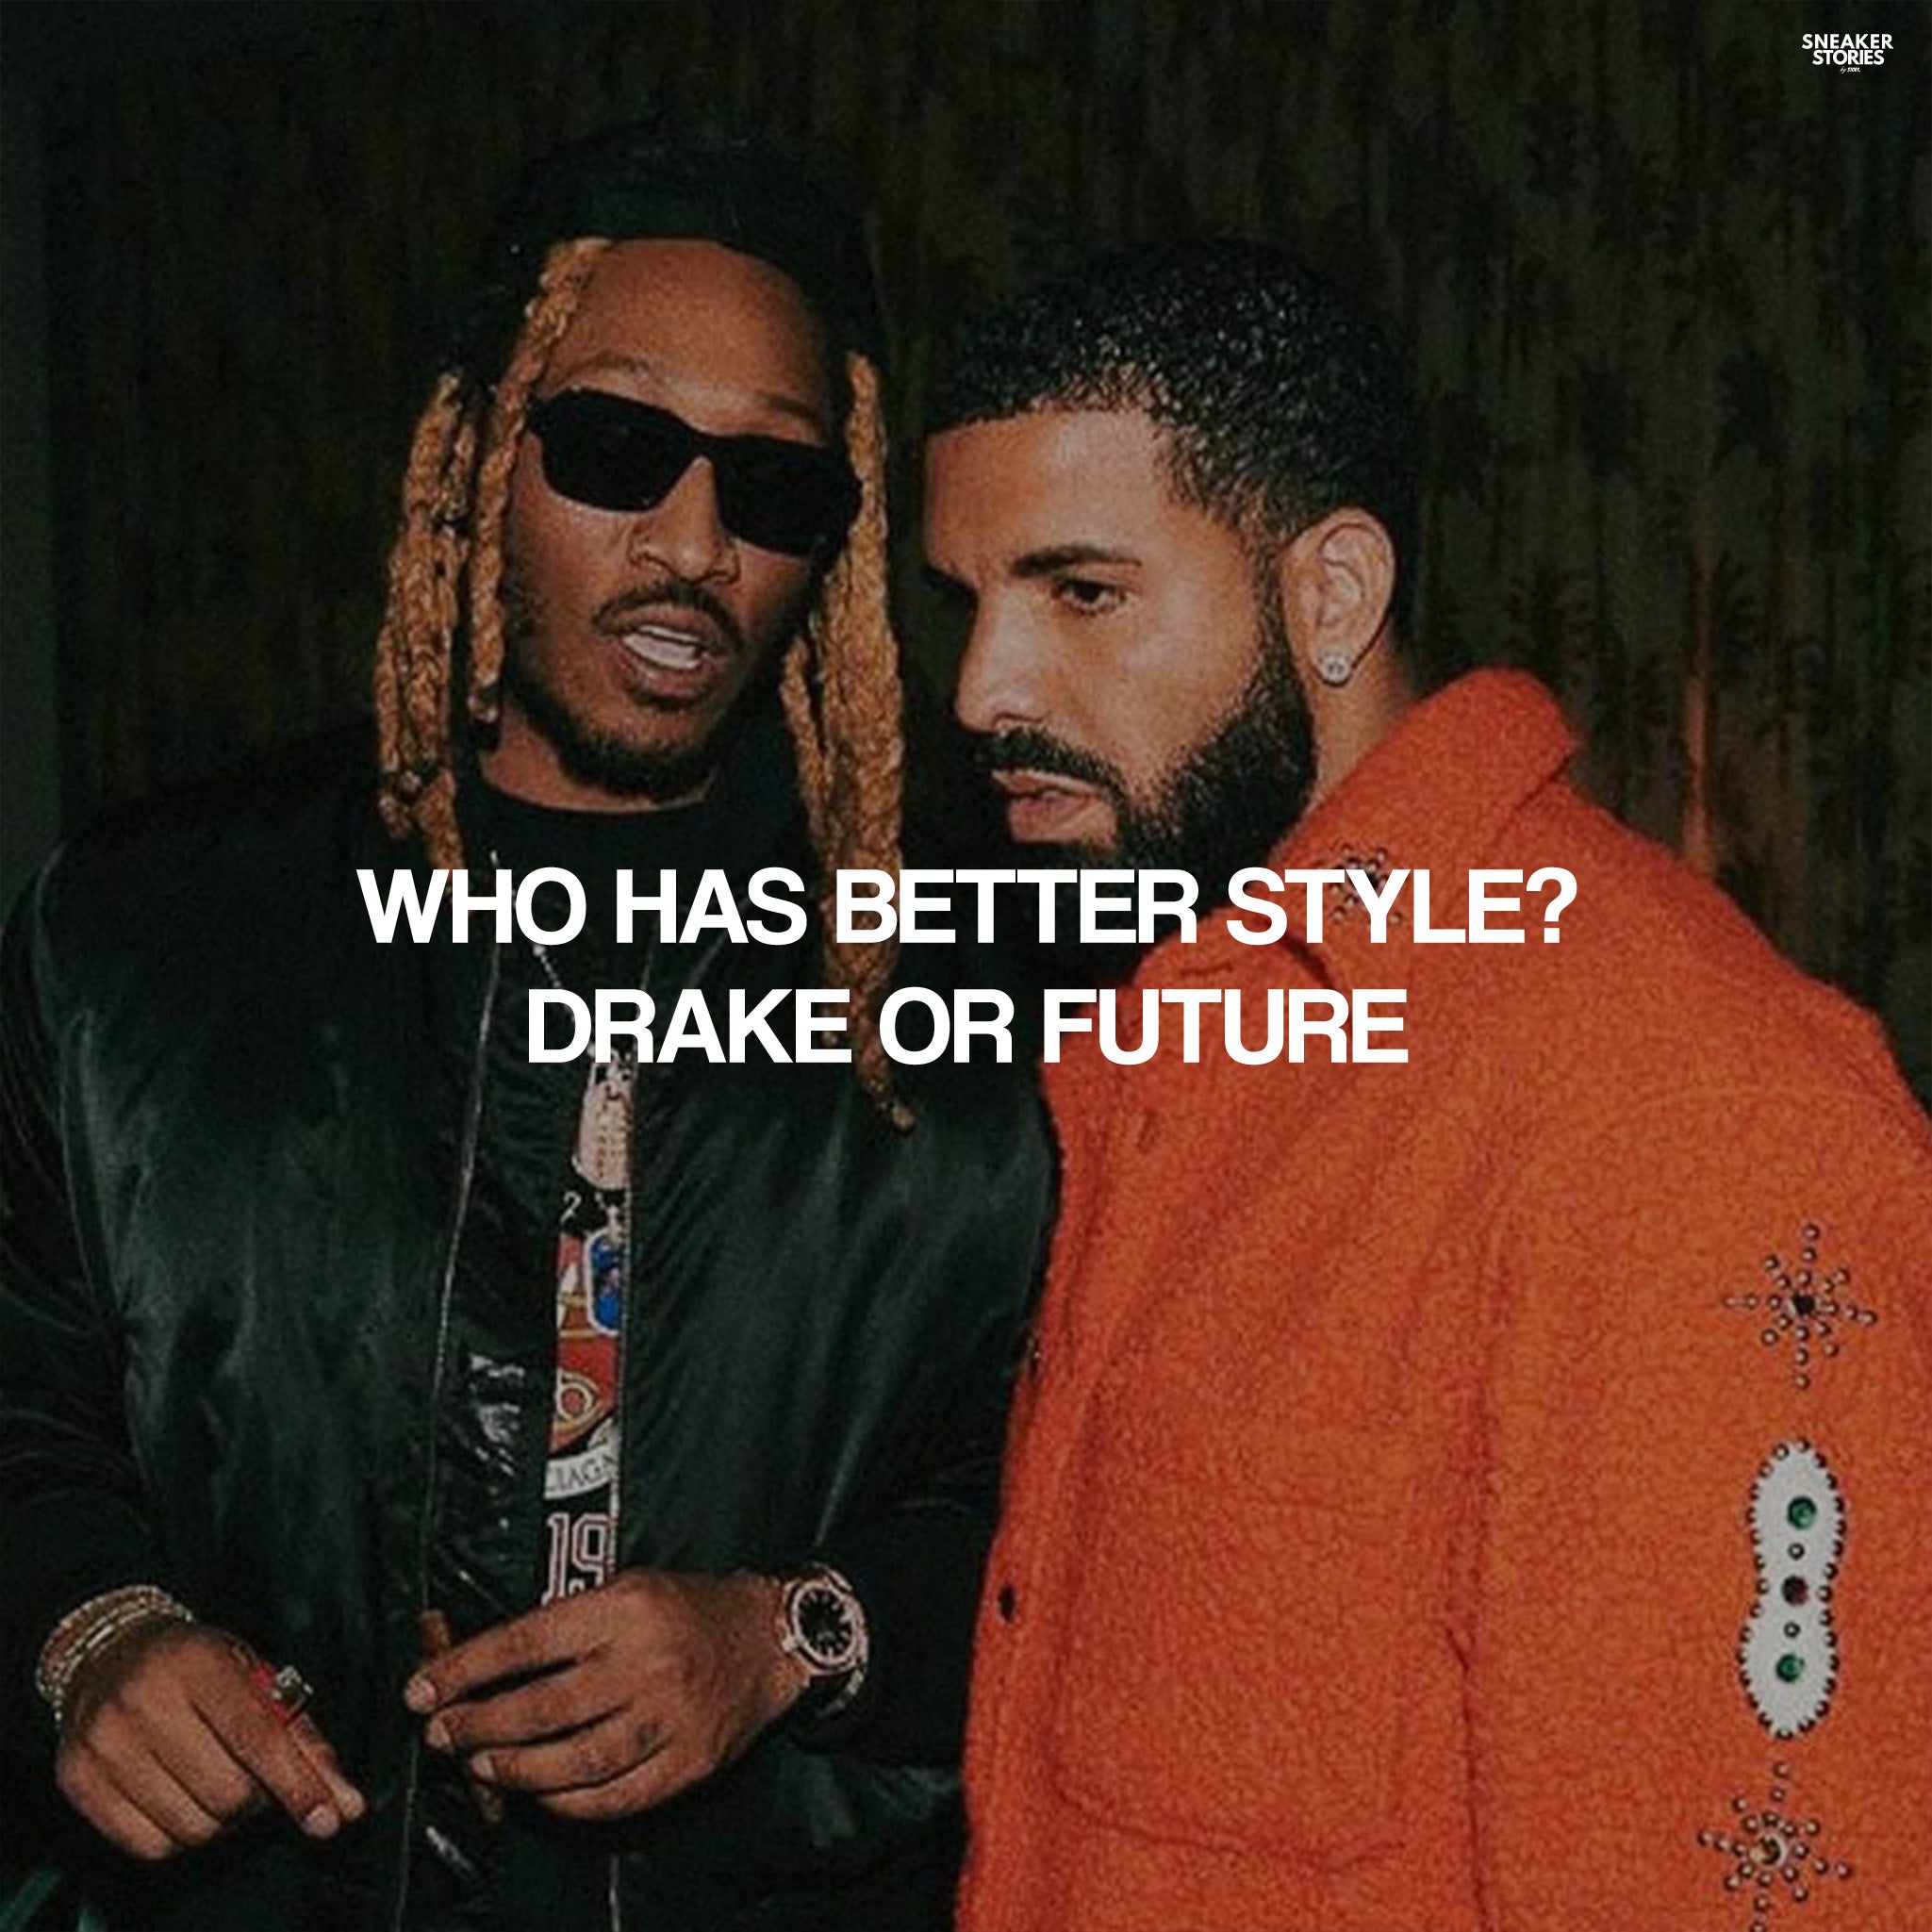 Who has better style? Drake or Future